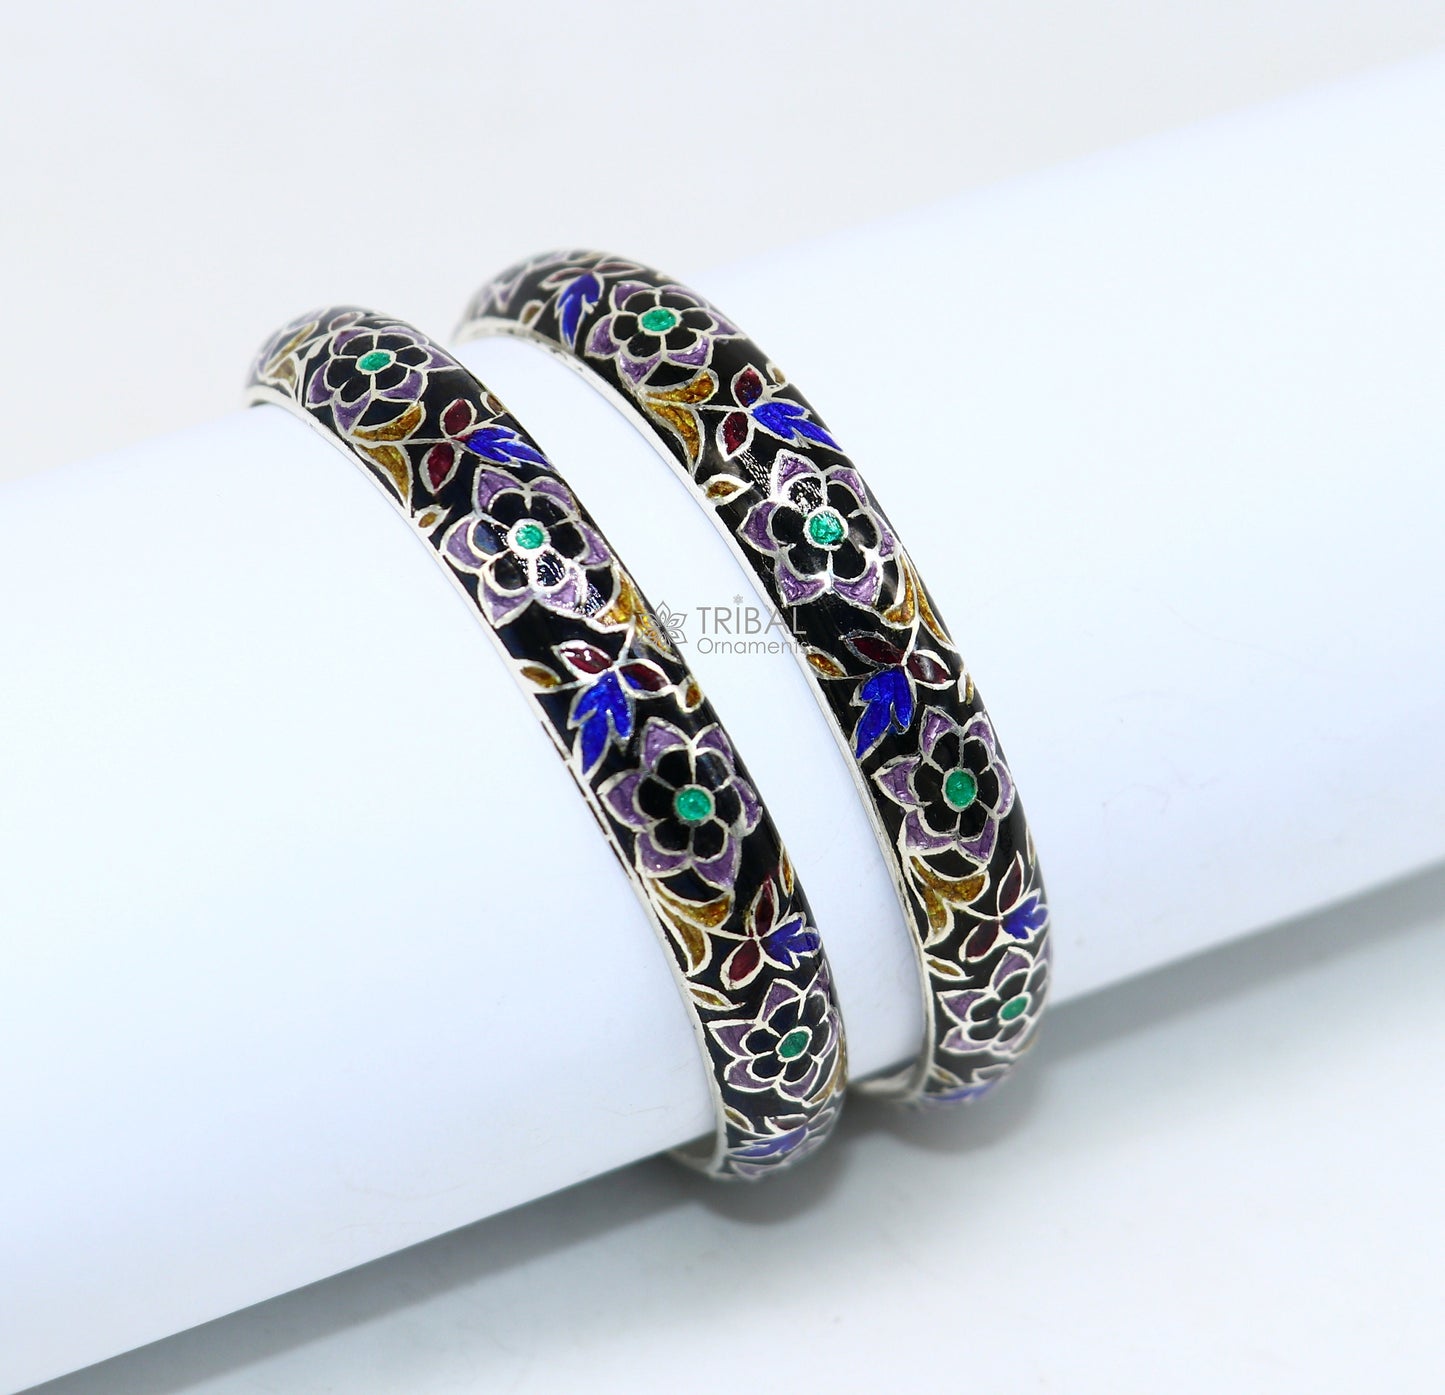 925 Sterling silver handmade amazing meenakari (color enamel )bangle bracelet vintage Cultral trendy style jewelry from india nba353 - TRIBAL ORNAMENTS